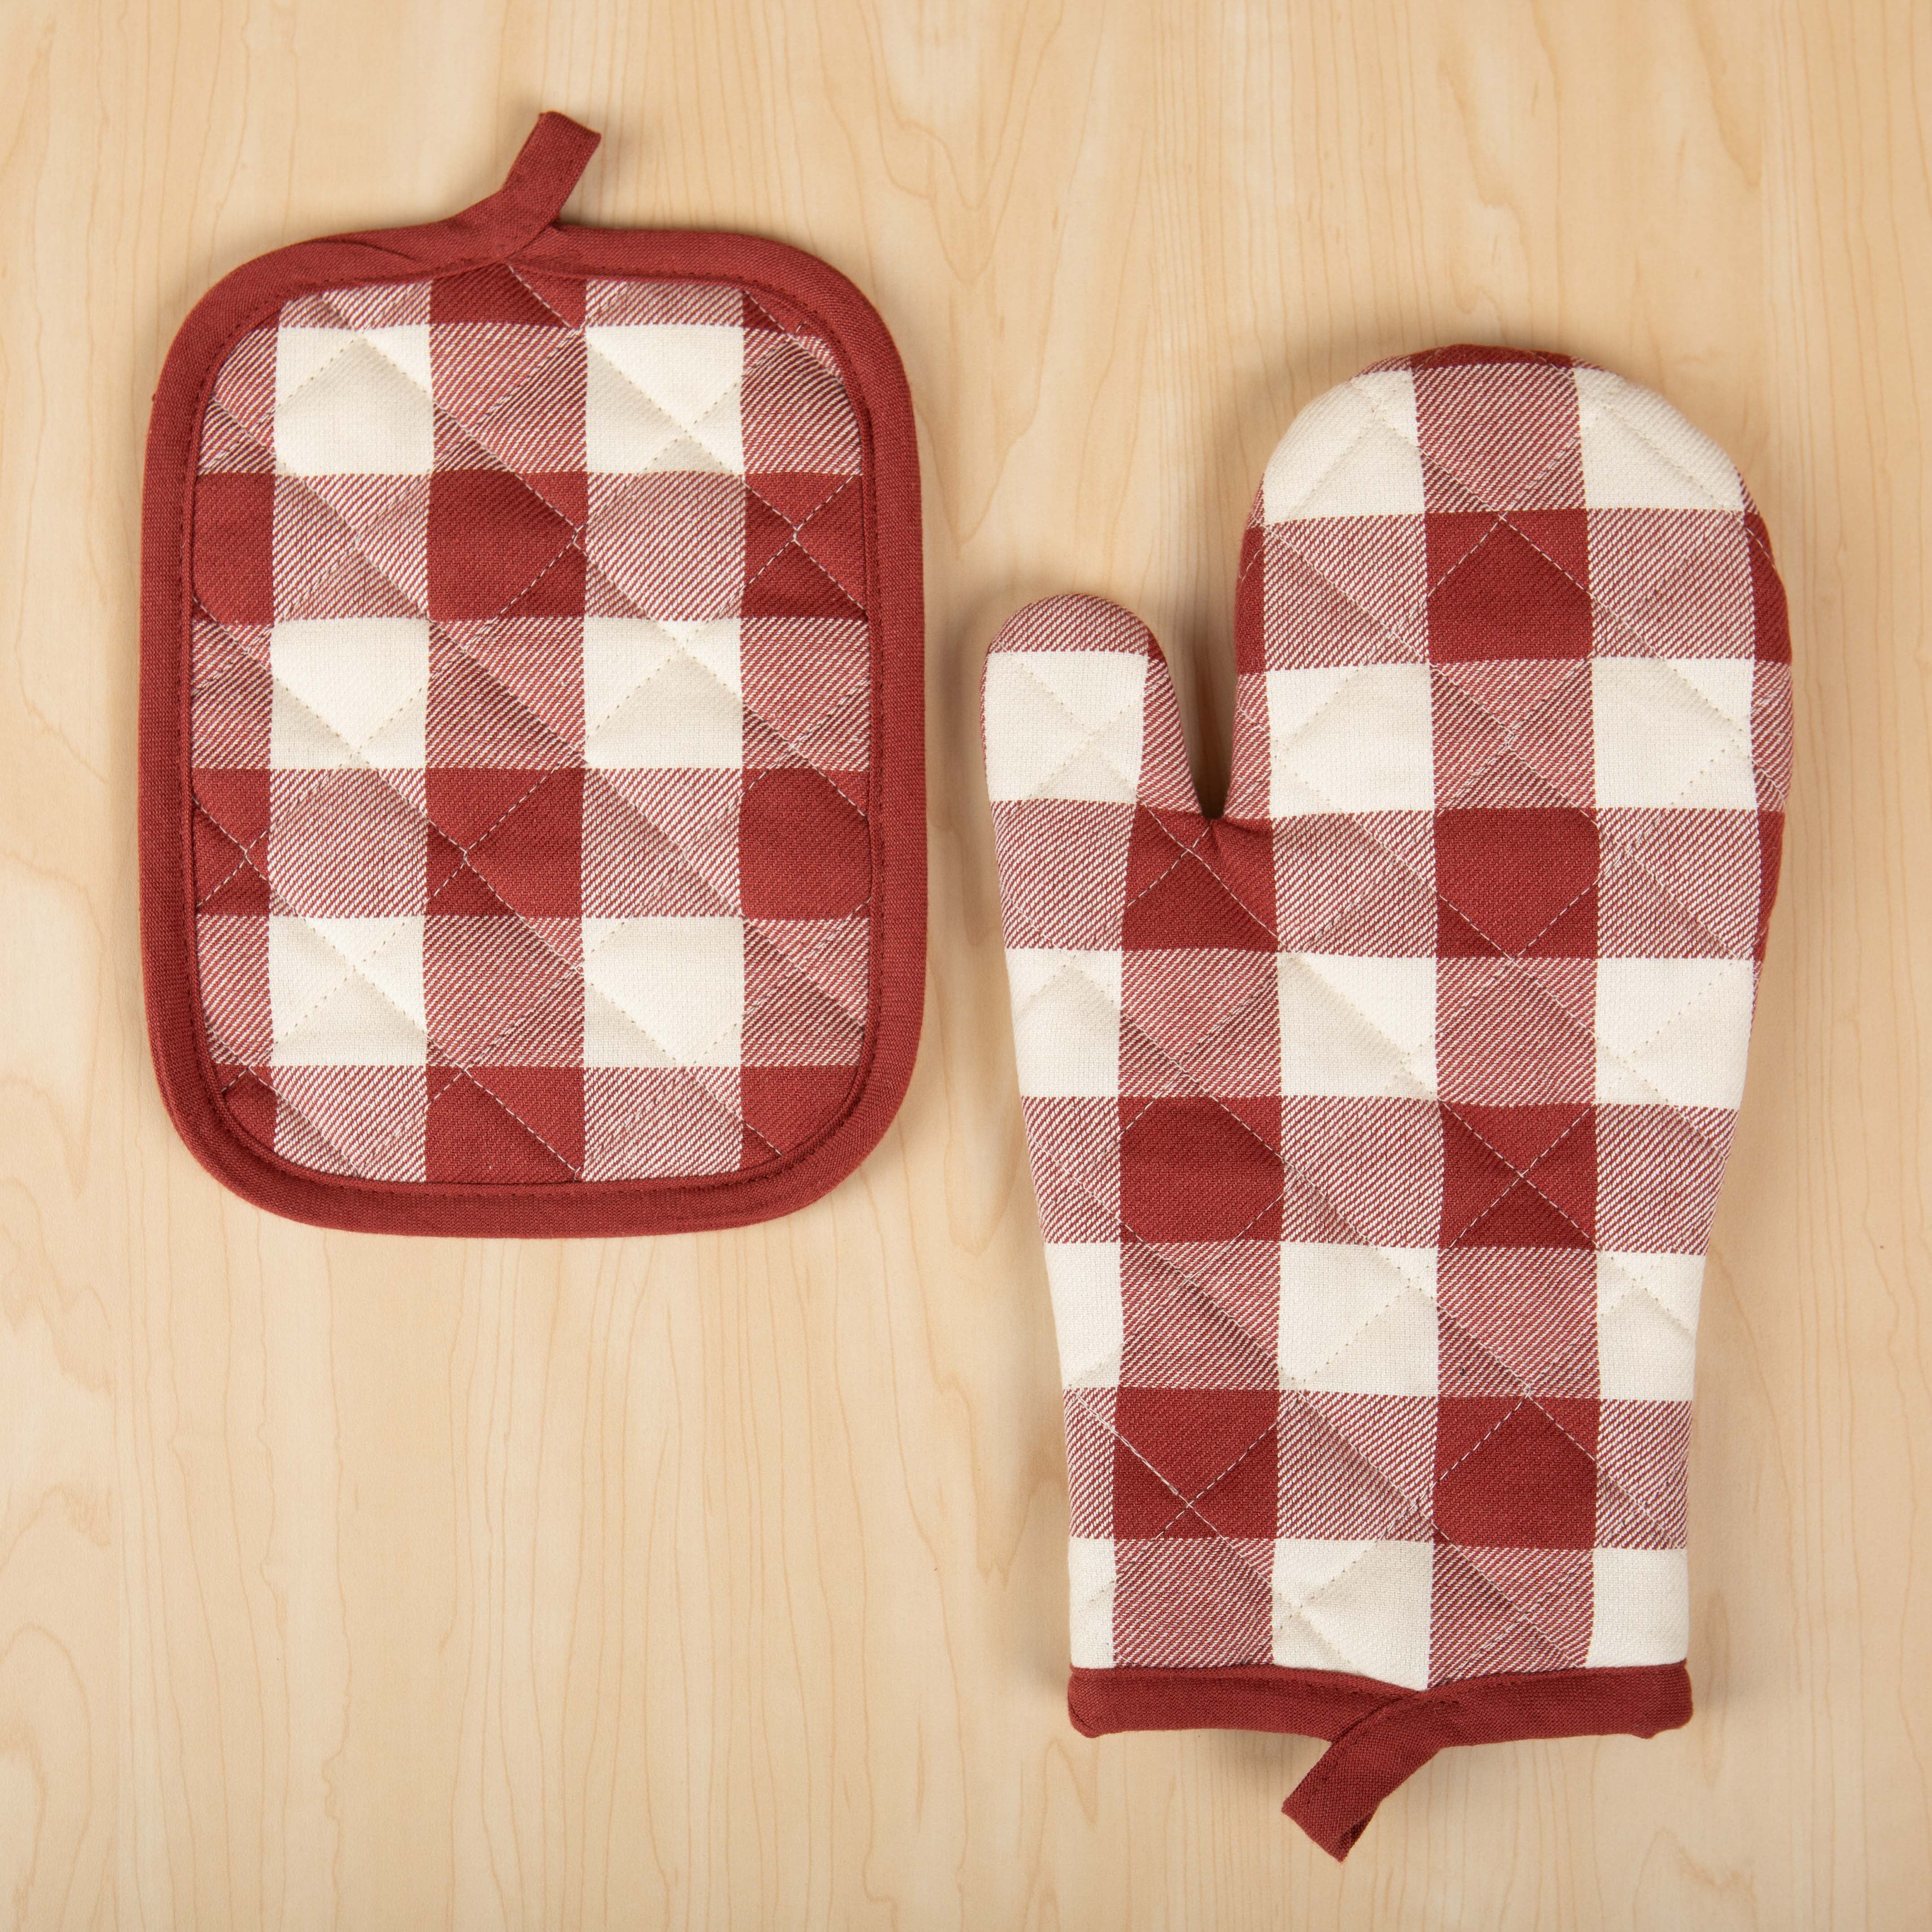 NEW Home Collection 'LIVE SIMPLY' Kitchen TOWEL SET Oven Mitt Pot Holder